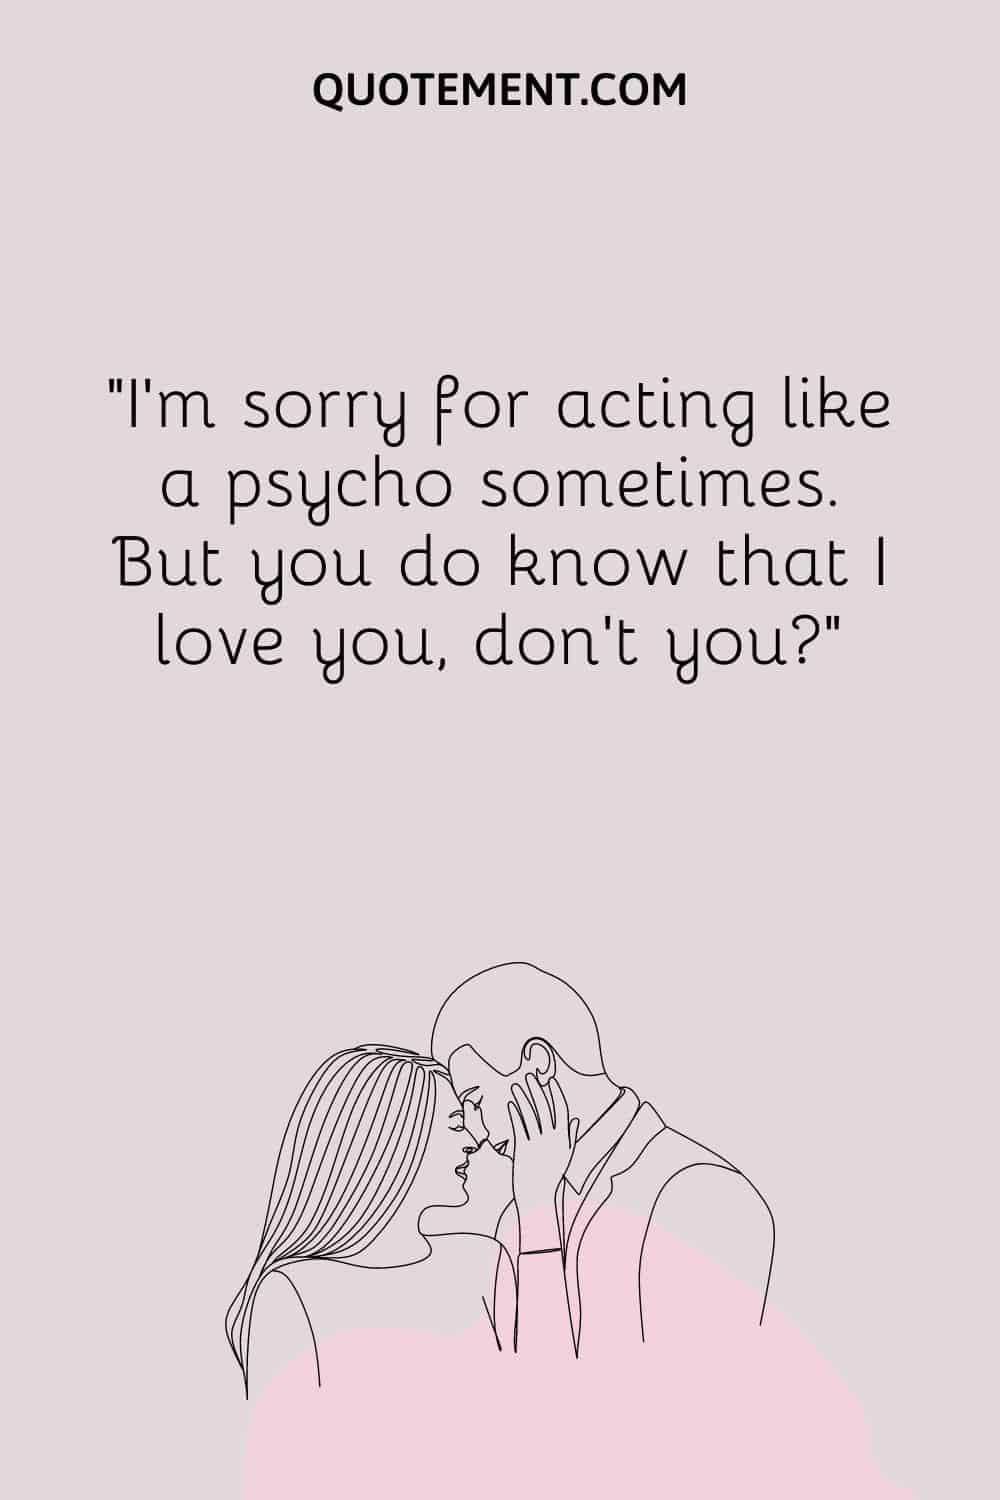 I’m sorry for acting like a psycho sometimes